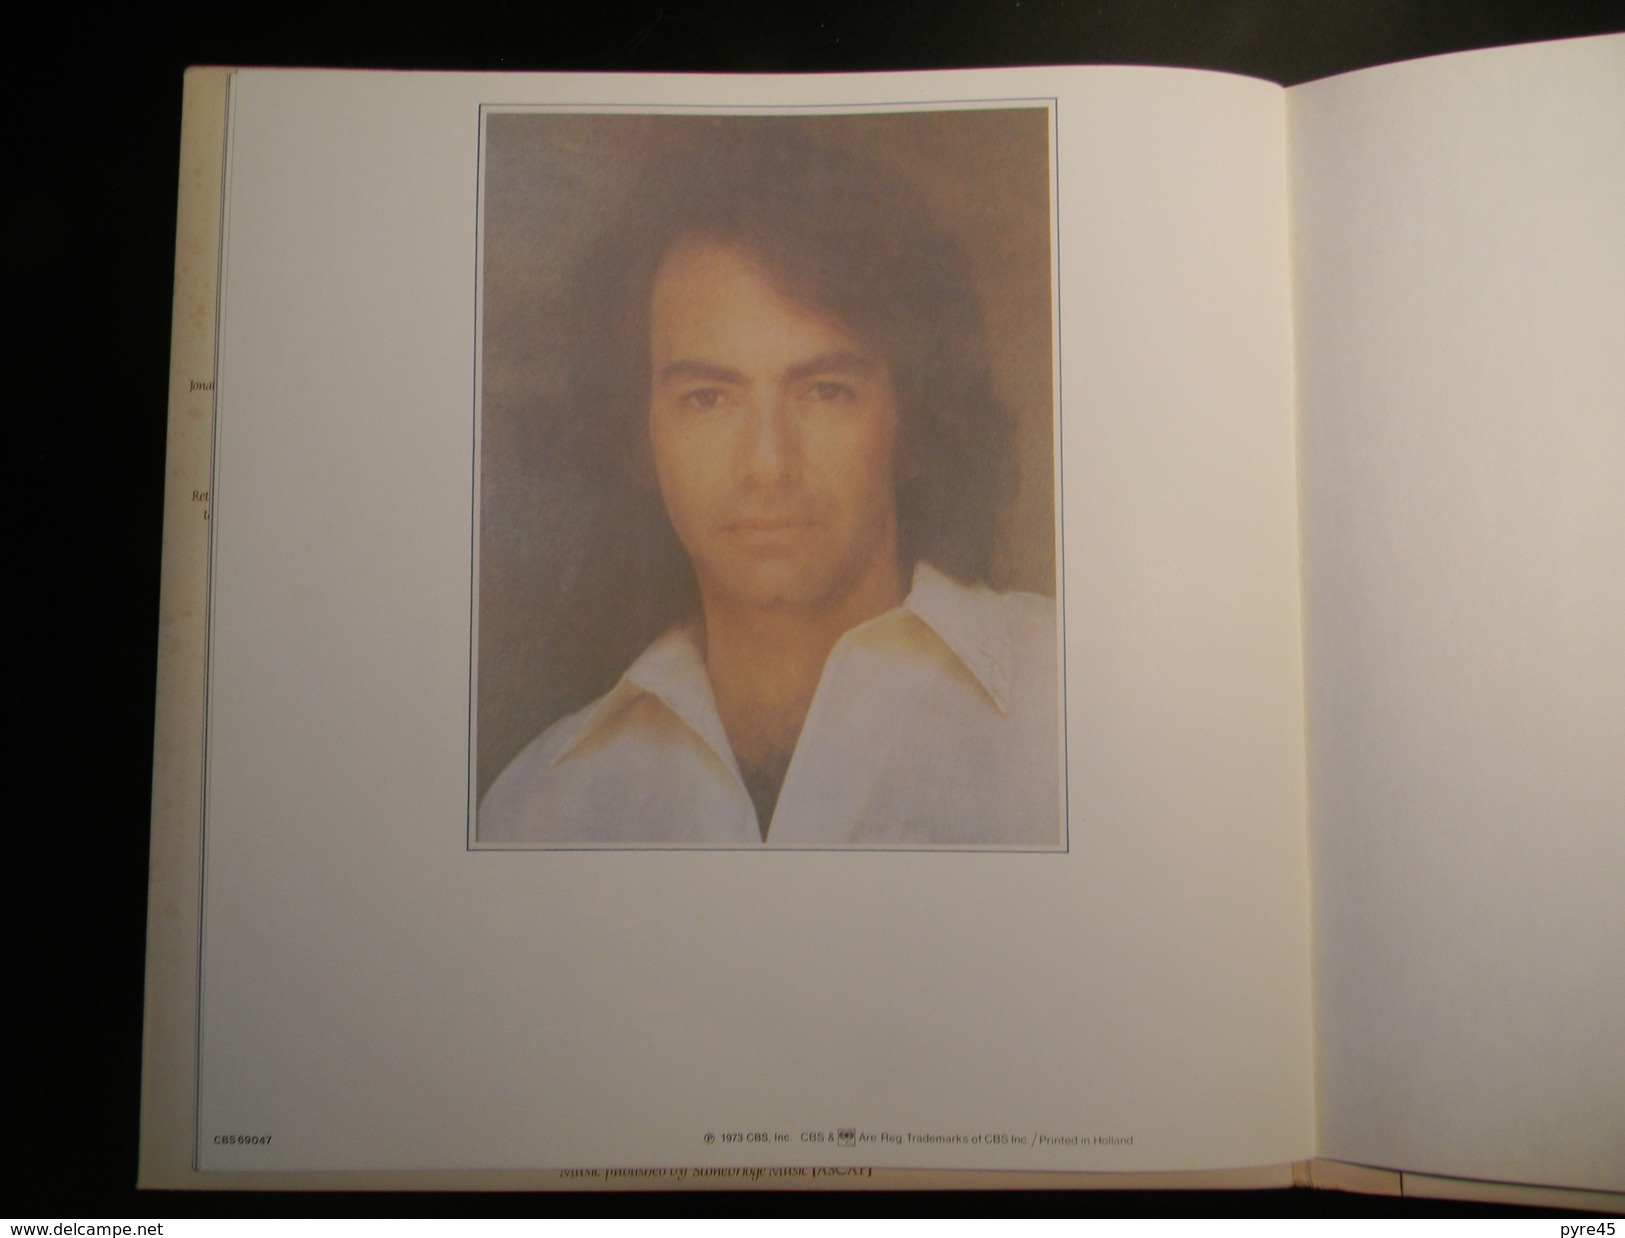 33 TOURS NEIL DIAMOND JONATHAN LIVINGSTON SEAGULL CBS 69047 BE / LONELY LOOKING SKY / DEAR FATHER / ANTHEM / + 2